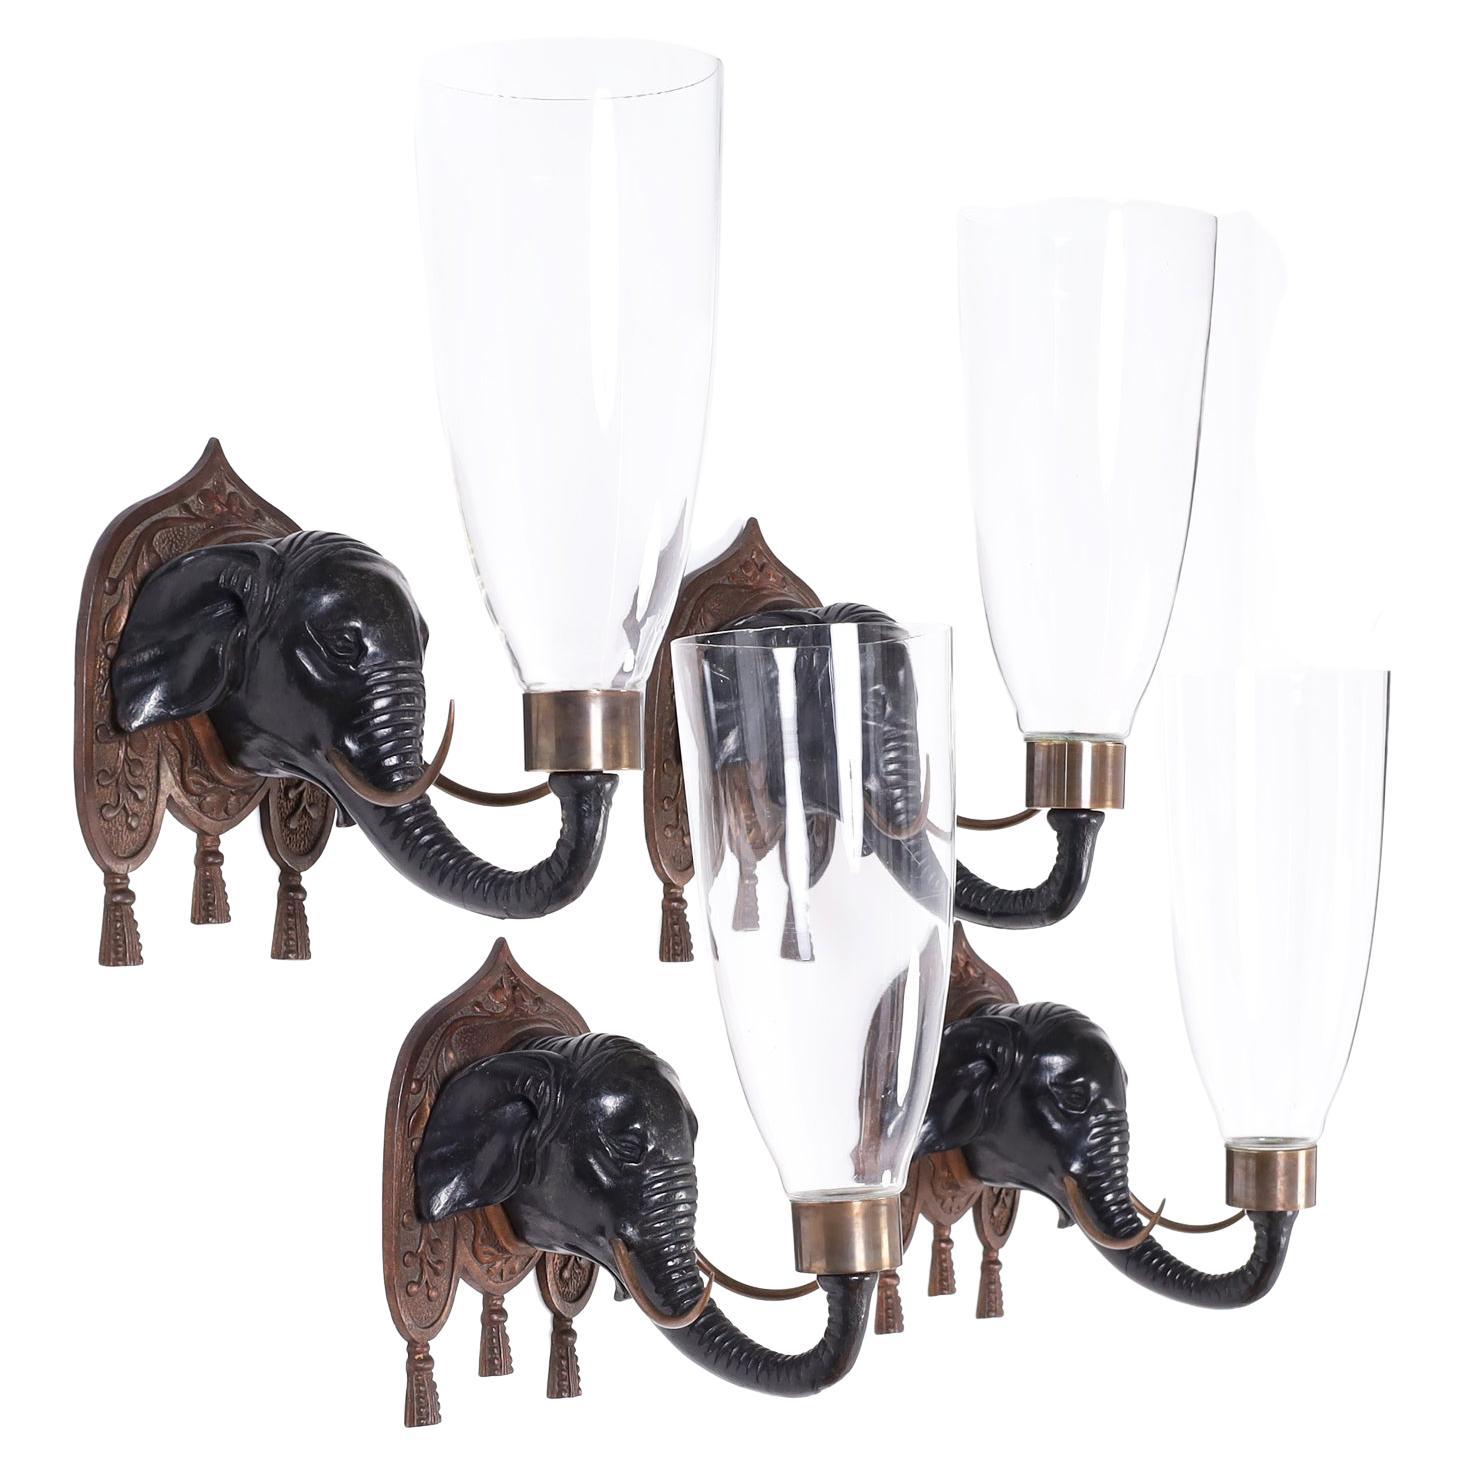 Four British Colonial Style Carved Wood Elephant Head Hurricane Wall Sconces